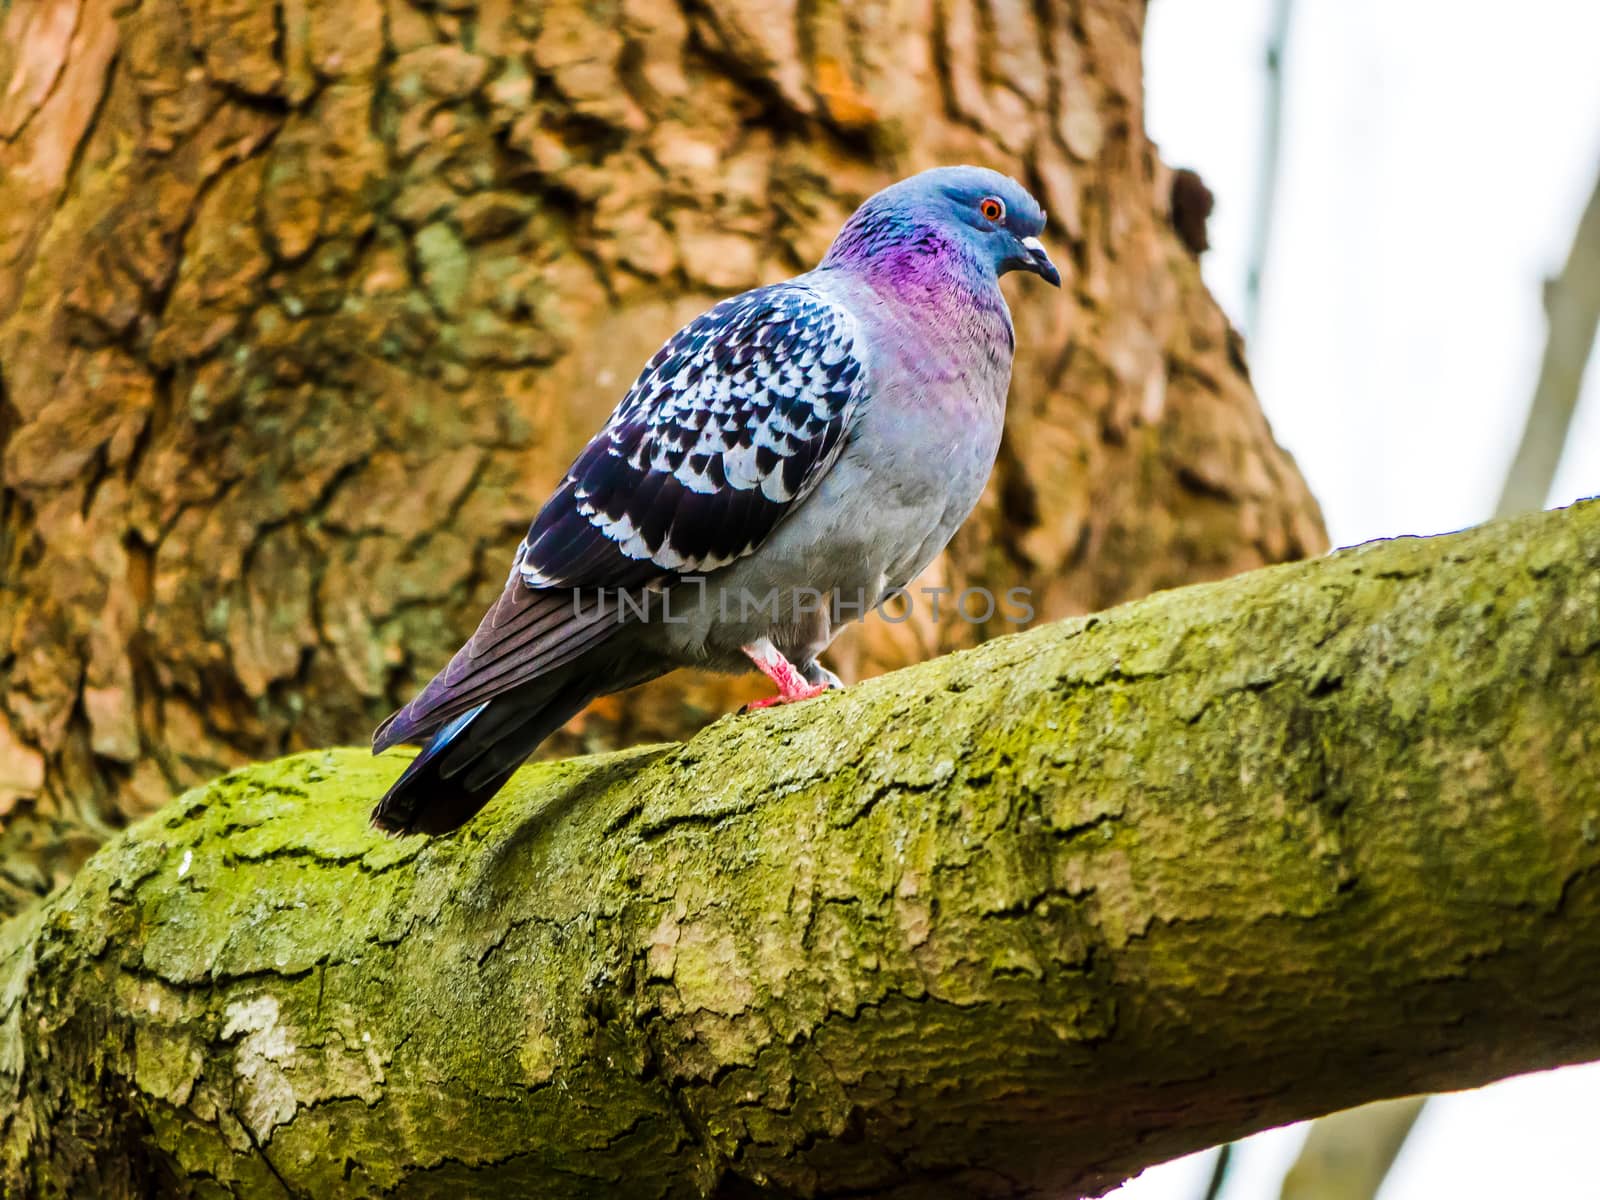 Colourful Pigeon on the Branch Close Up